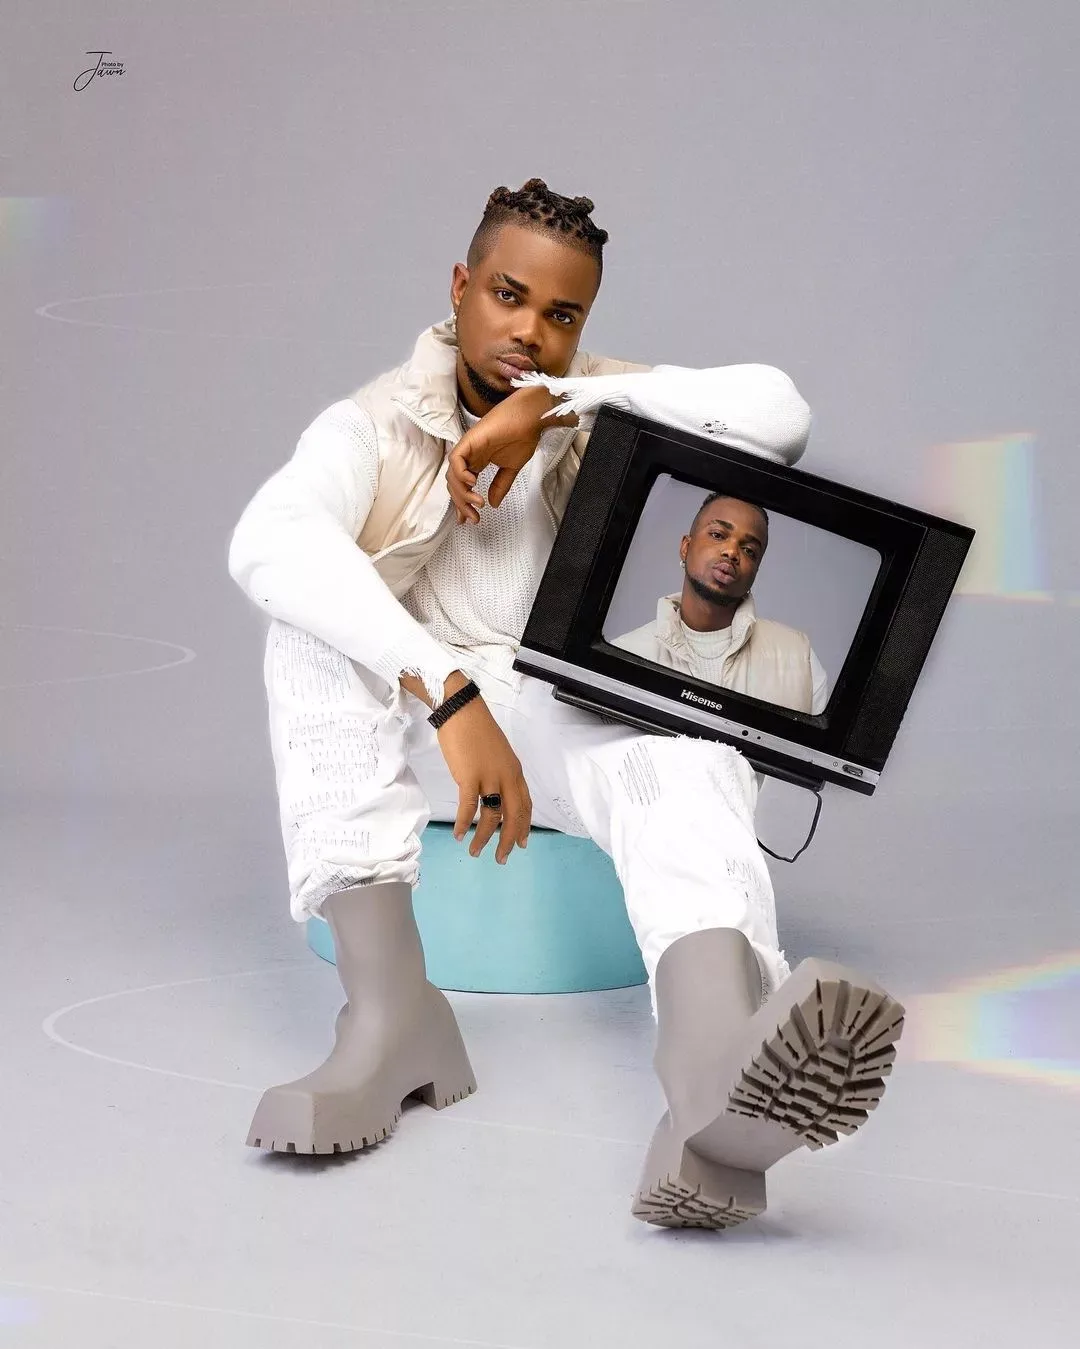 rexxie on a roll, drops two brand new records, NO MORE CONDITIONS and LAGOS